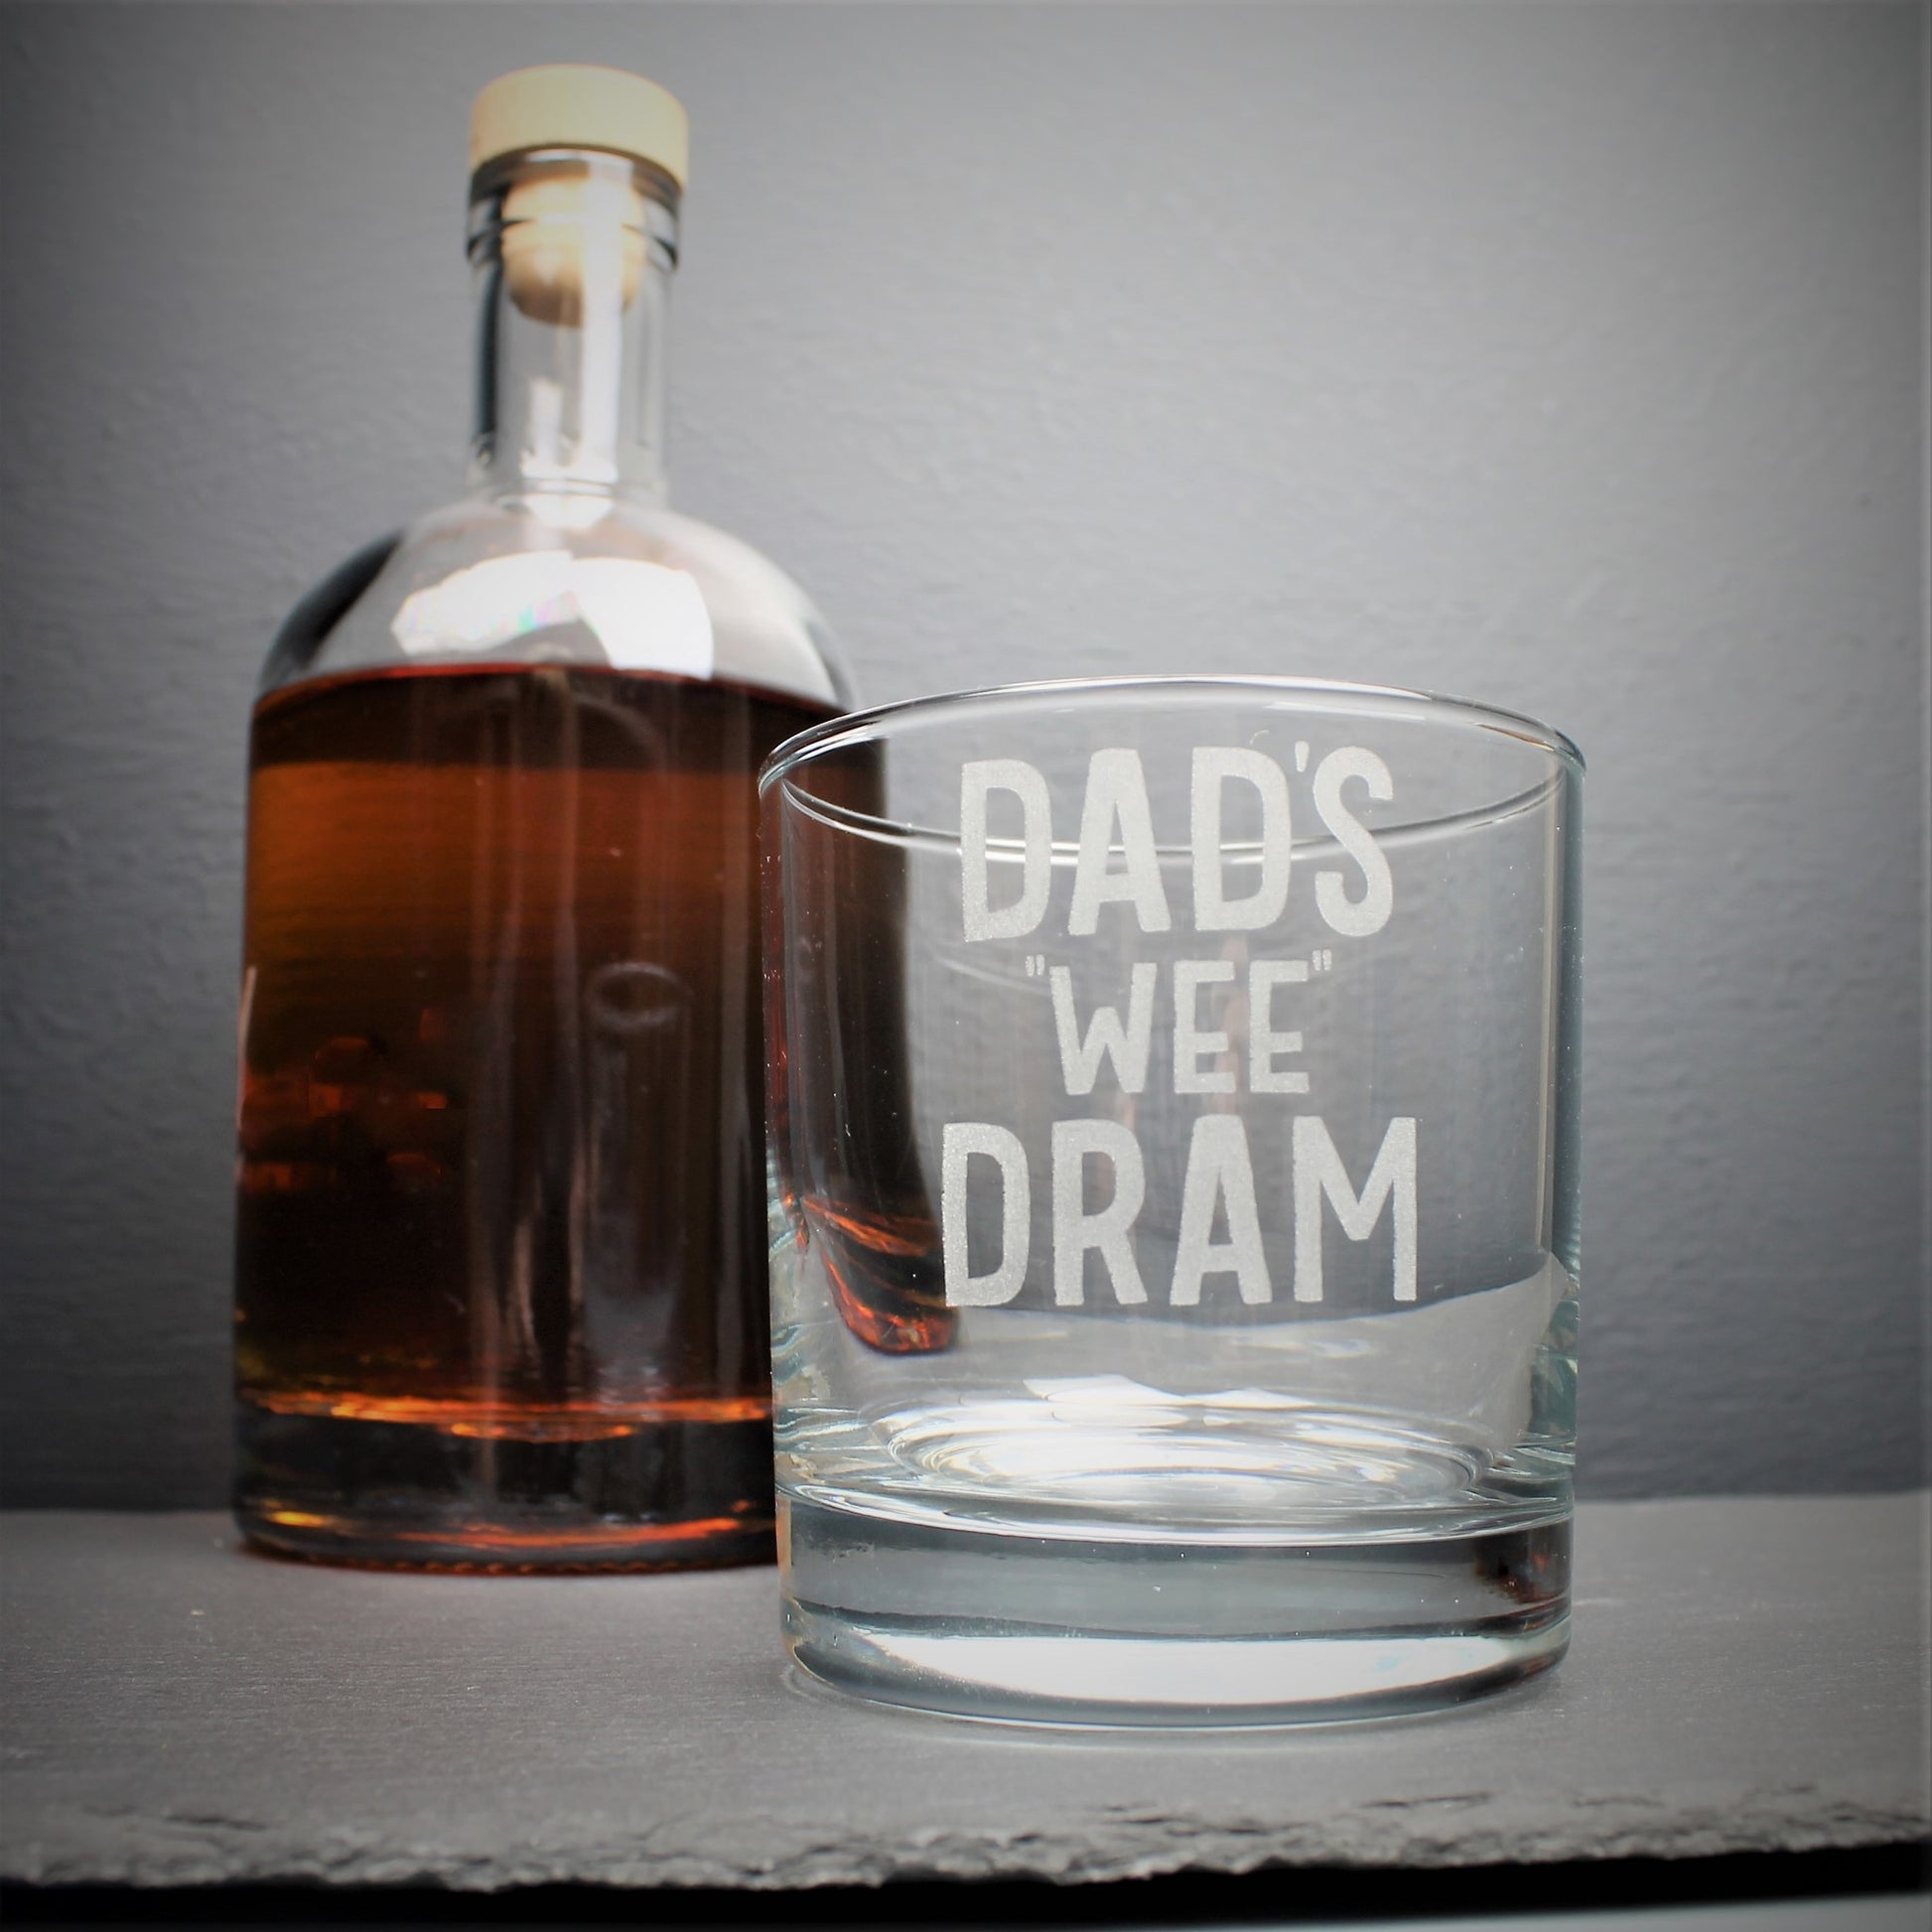 Engraved glass with Dad's wee dram, can also be personalised with own text